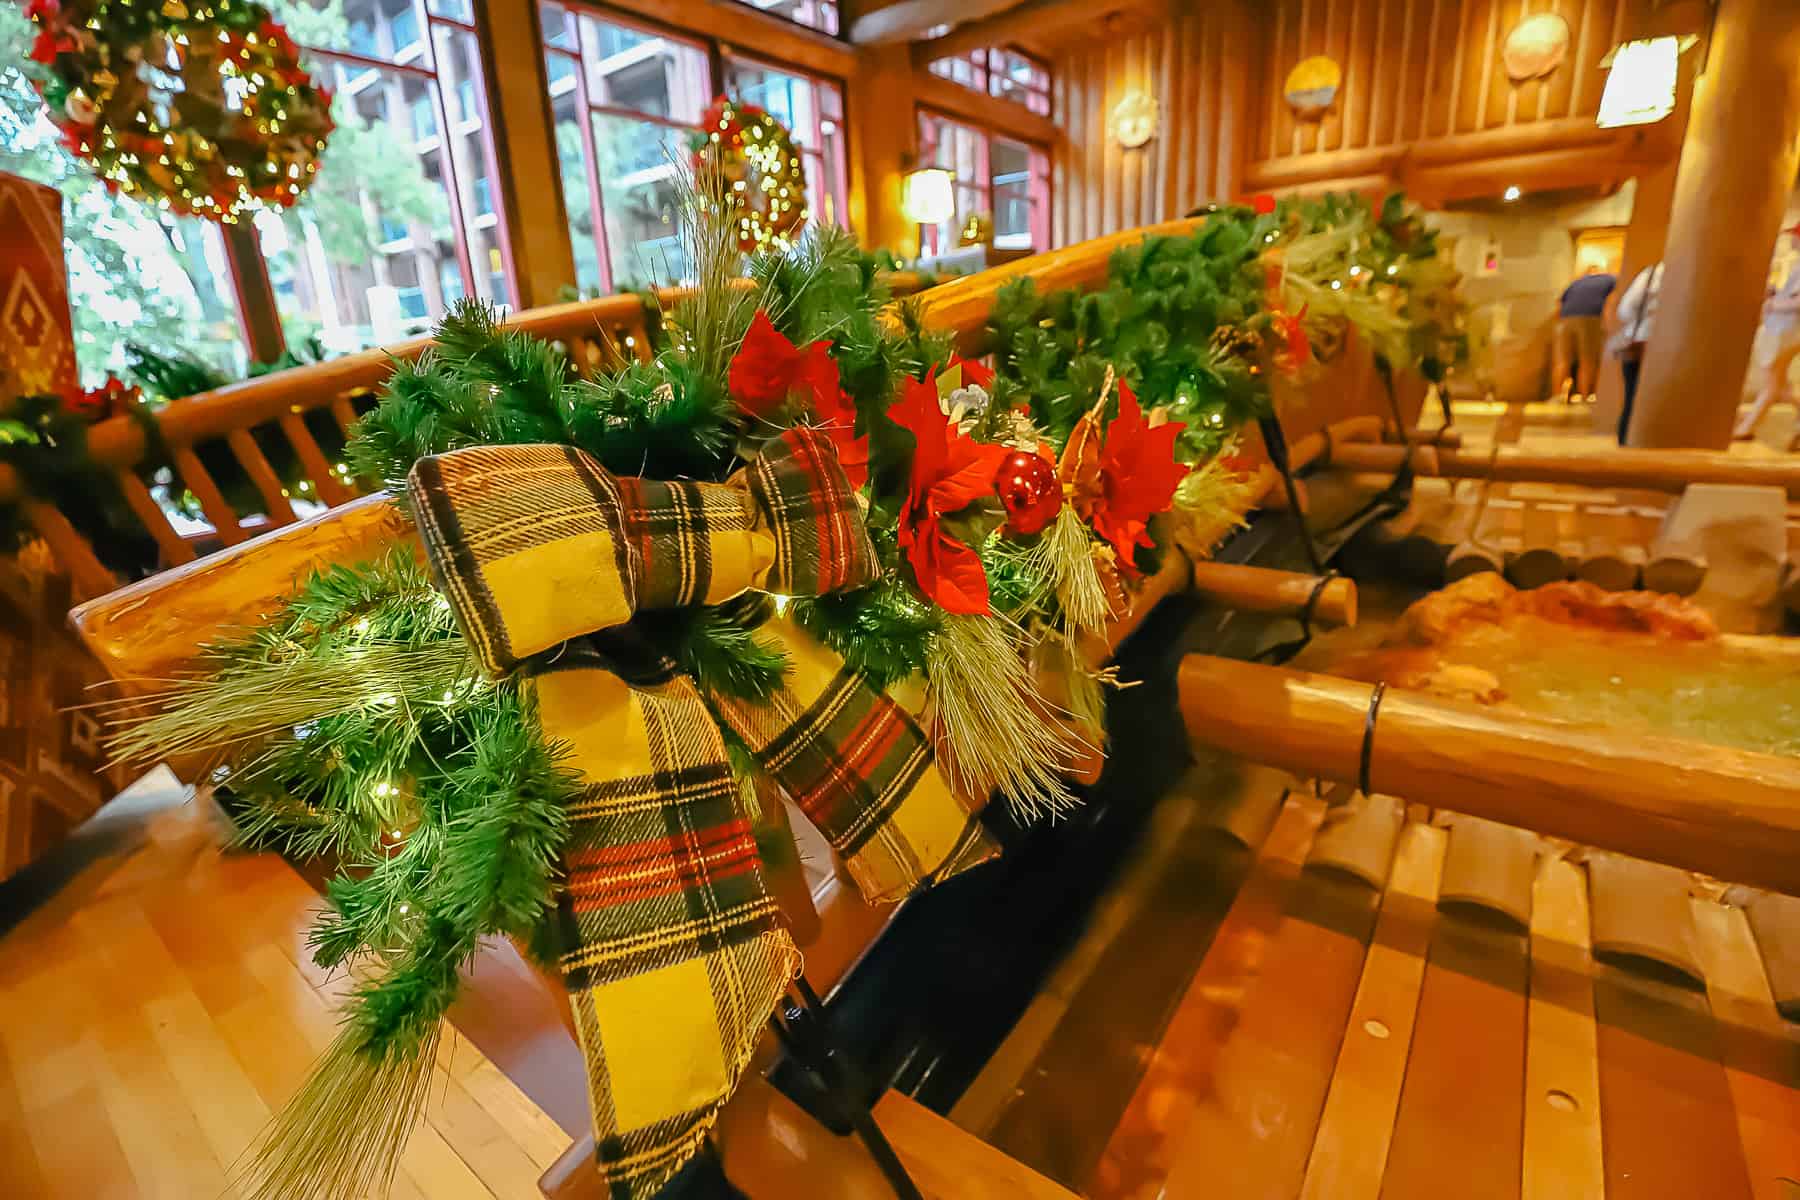 Garland with a large plaid bow tied to the bridge that runs over Copper Creek in the Wilderness Lodge's lobby.